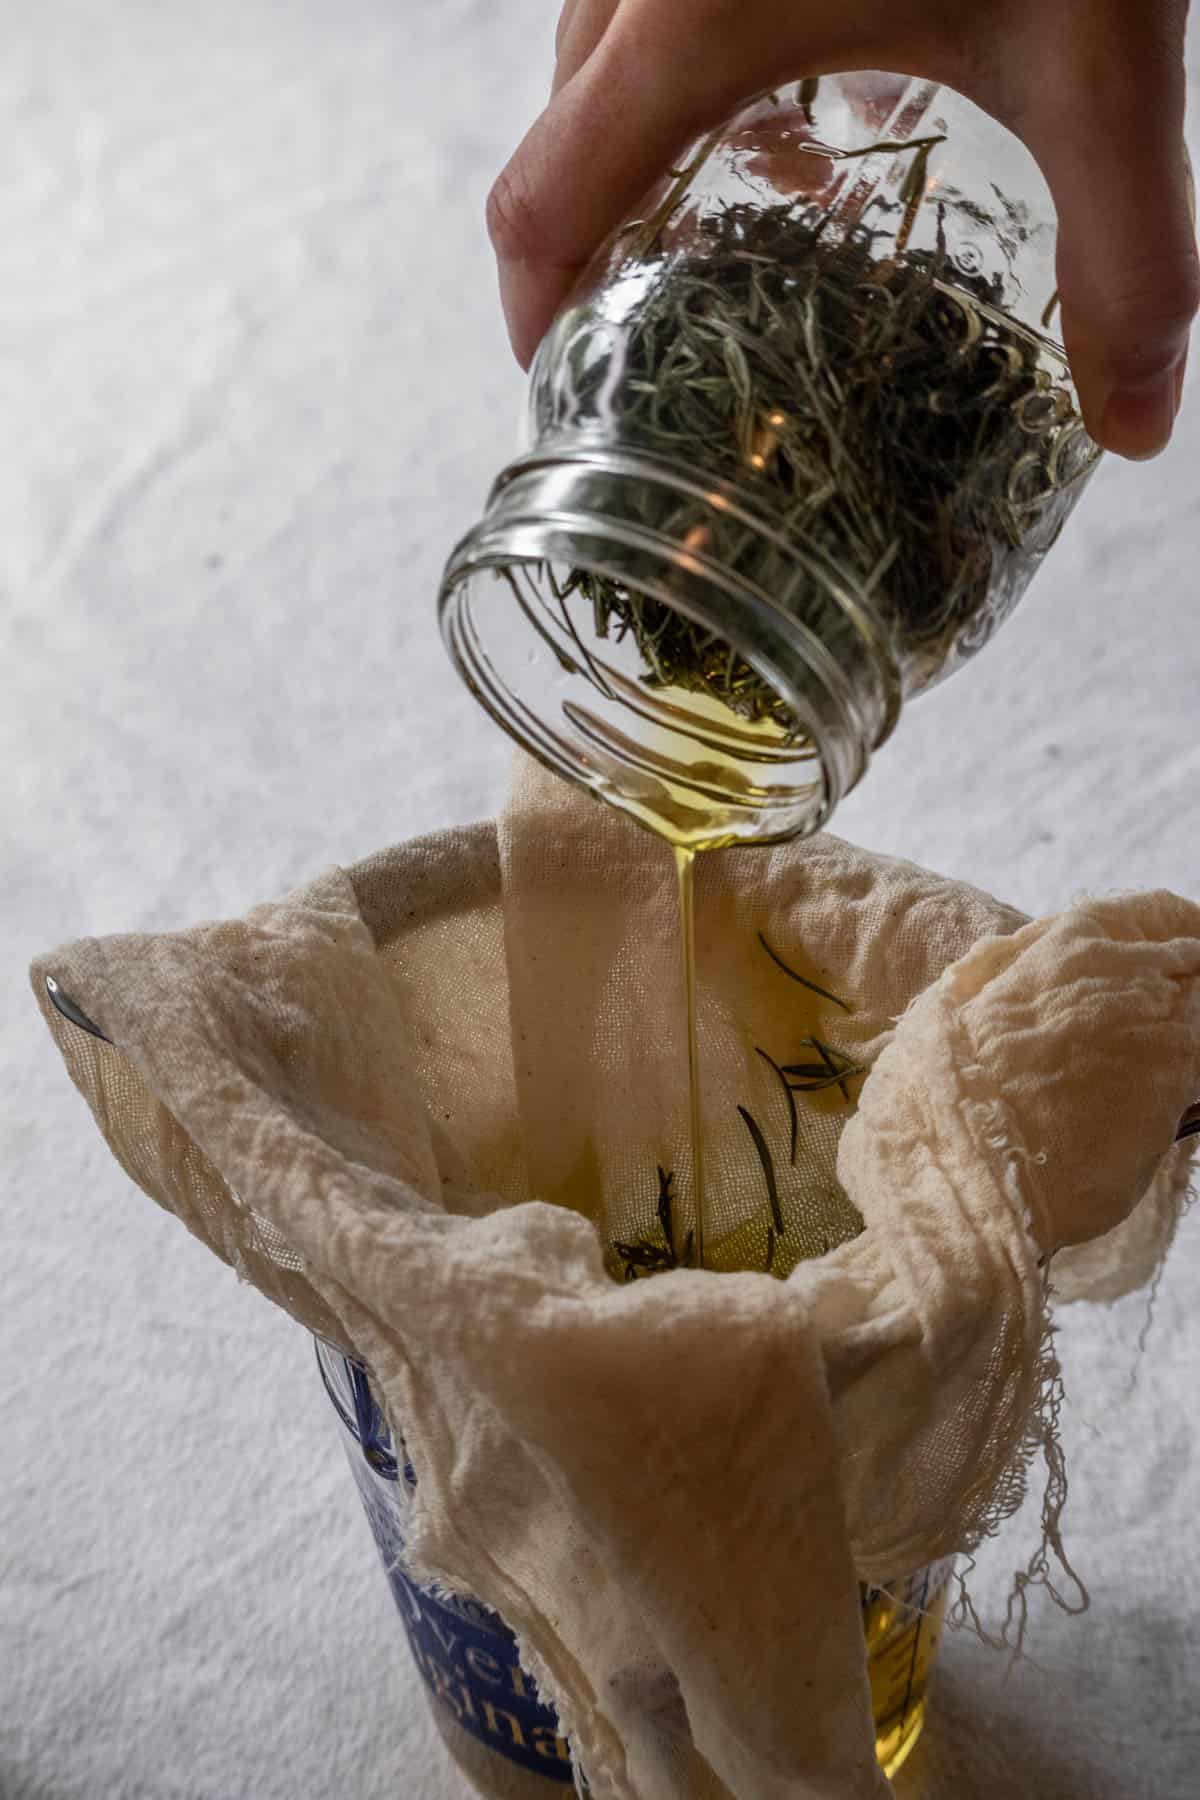 Rosemary oil being poured through a cheesecloth